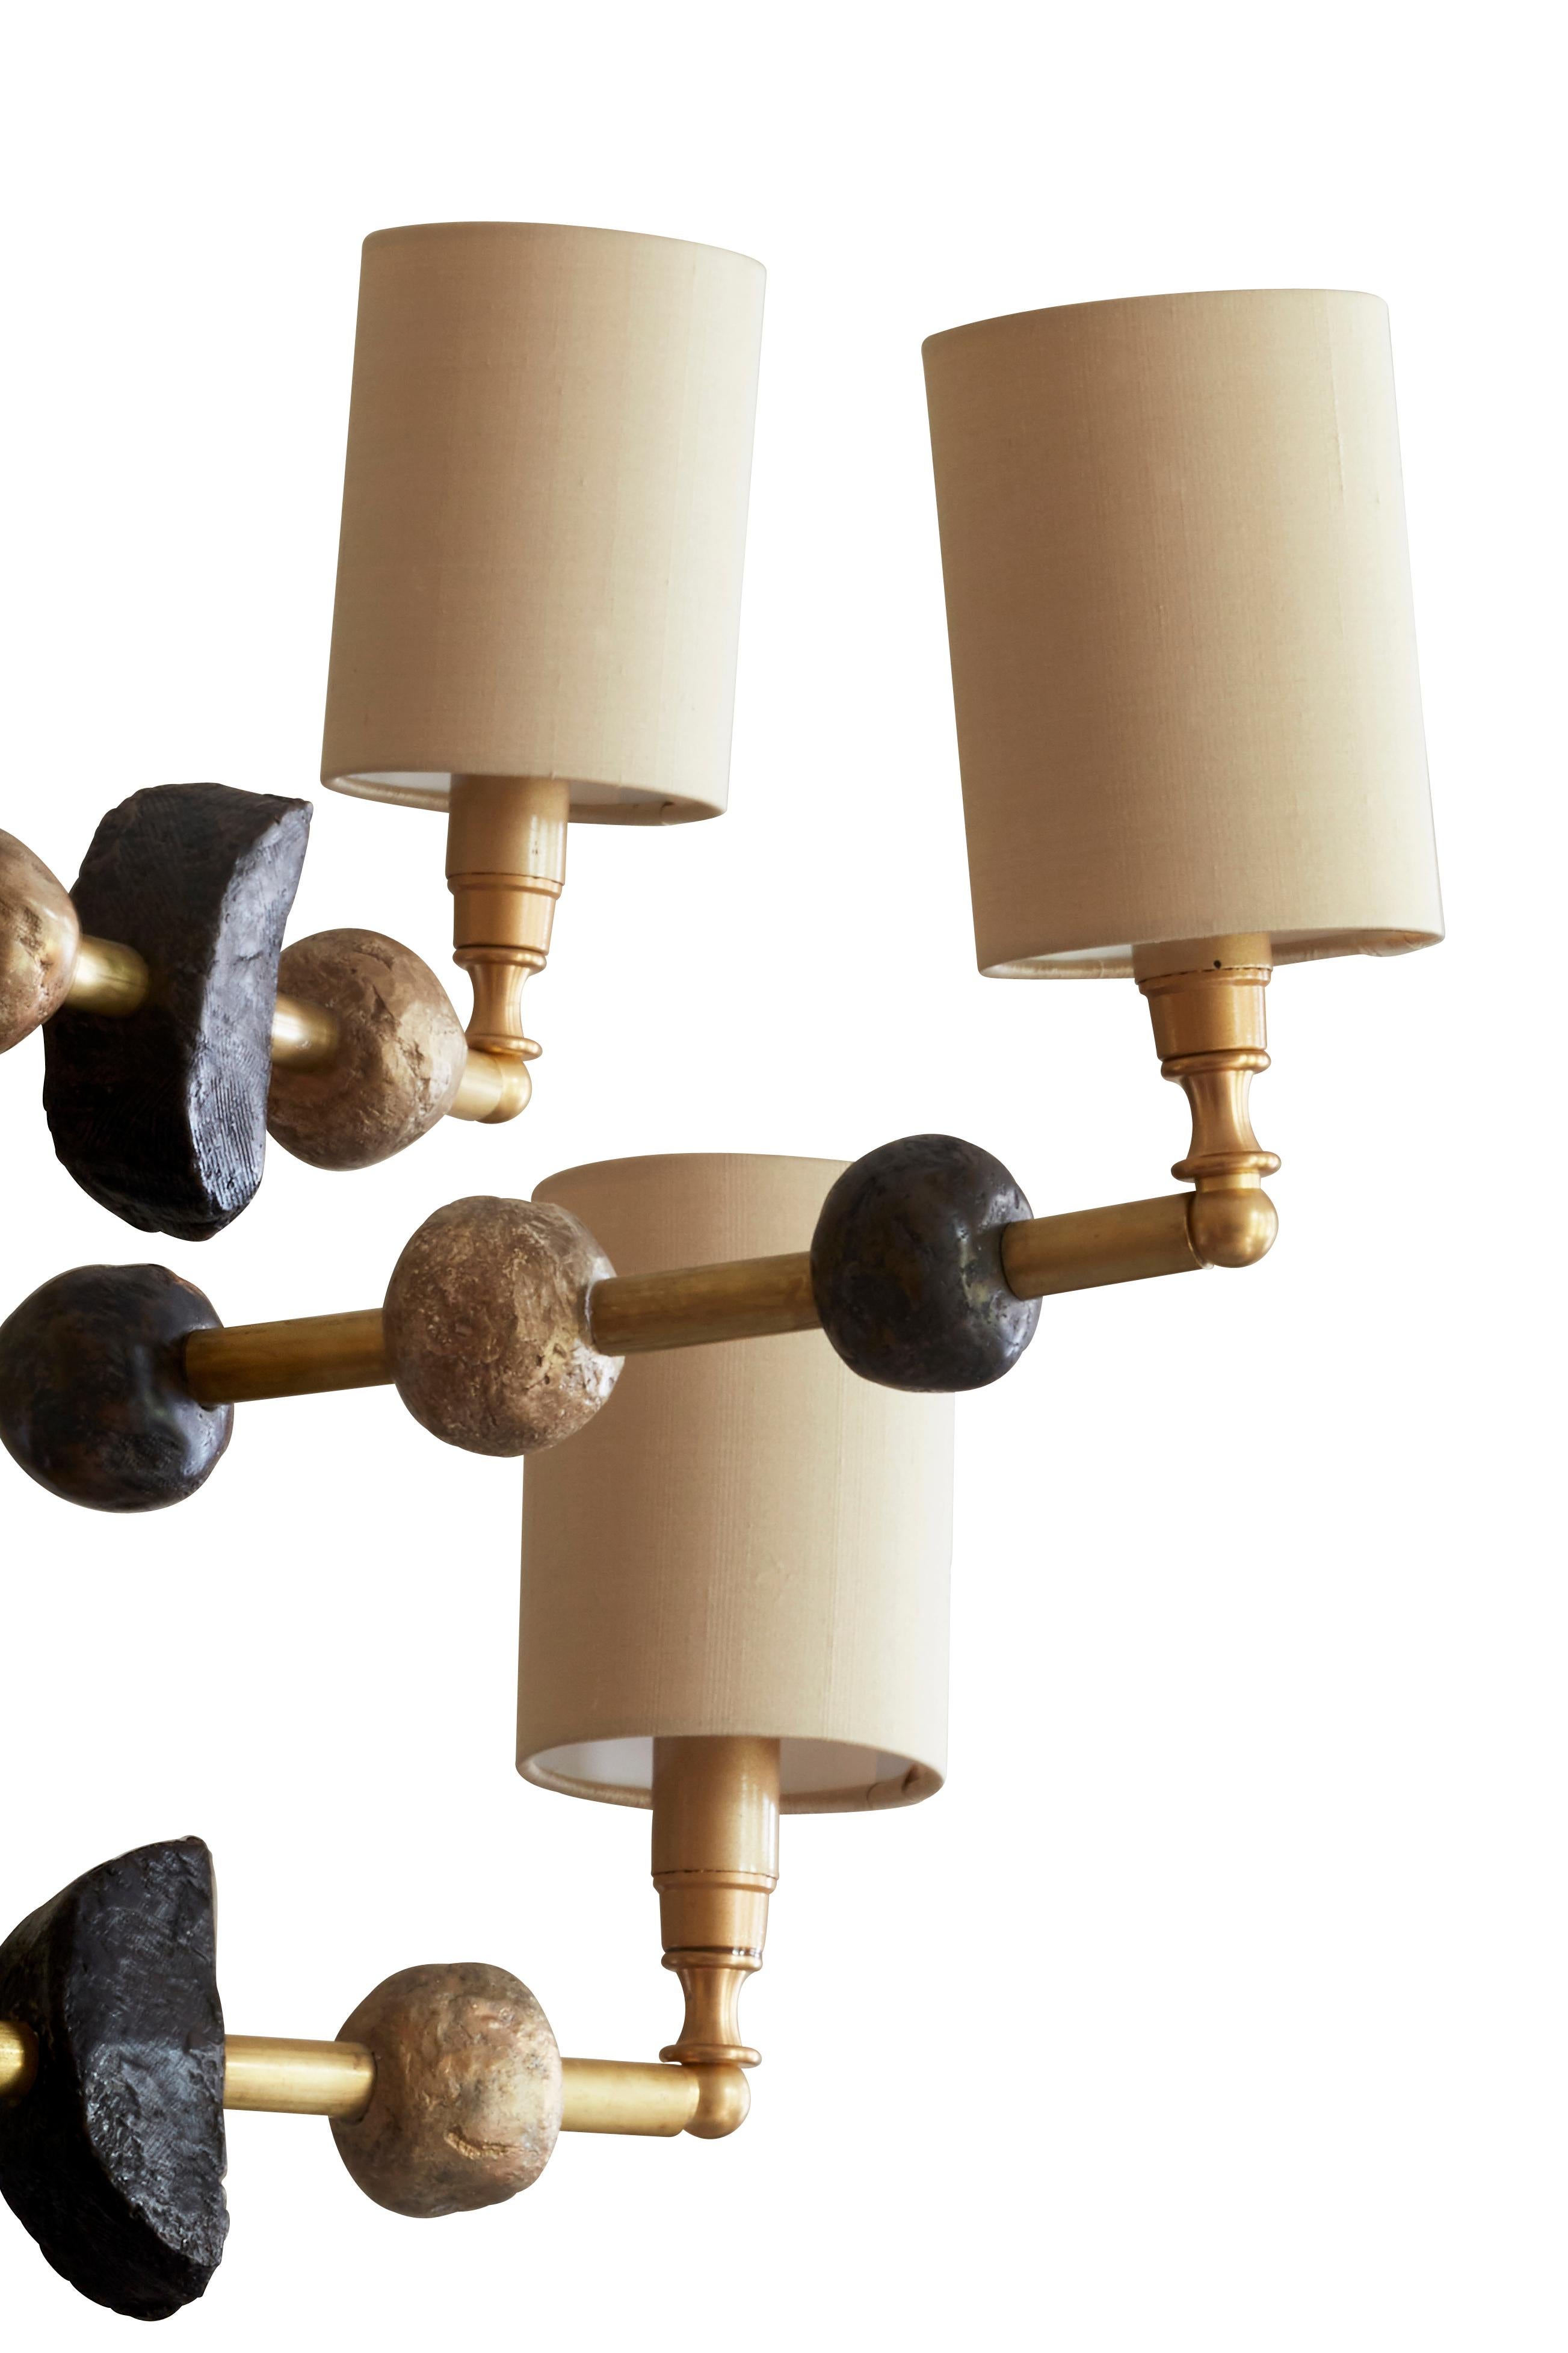 This contemporary three-tier chandelier by Margit Wittig features sculptural components with organic and subtle textures, all cast and treated with multiple layers of patina in her London studio. The contrast of dark, gold-waxed resin and brass, is